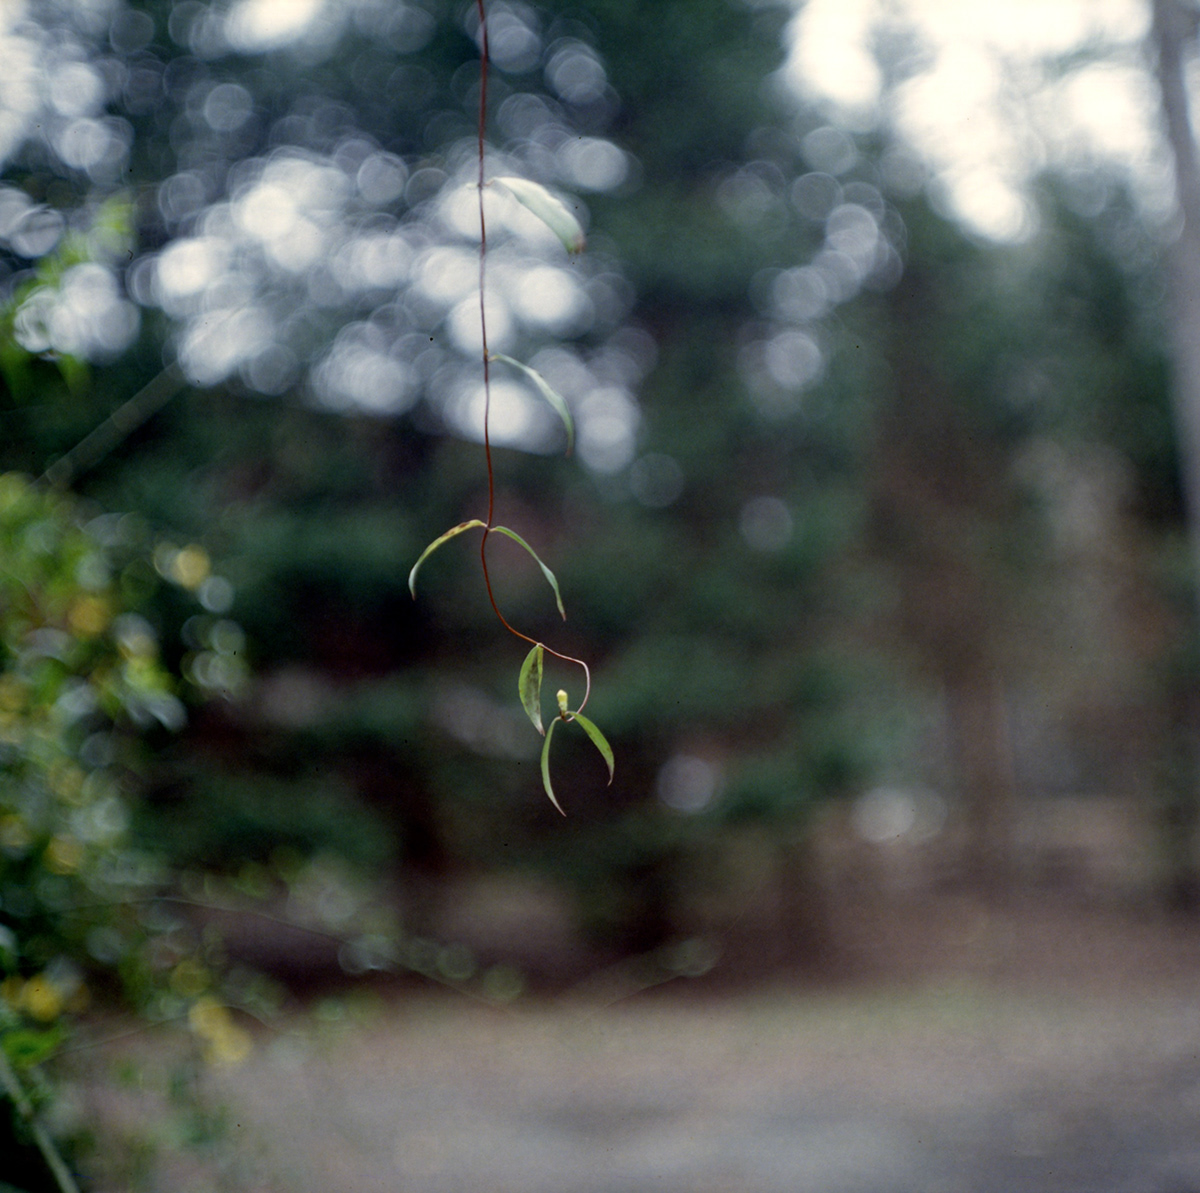 trees  Plants  nature  35mm medium format carl zeiss film photography plants Nature 35mm